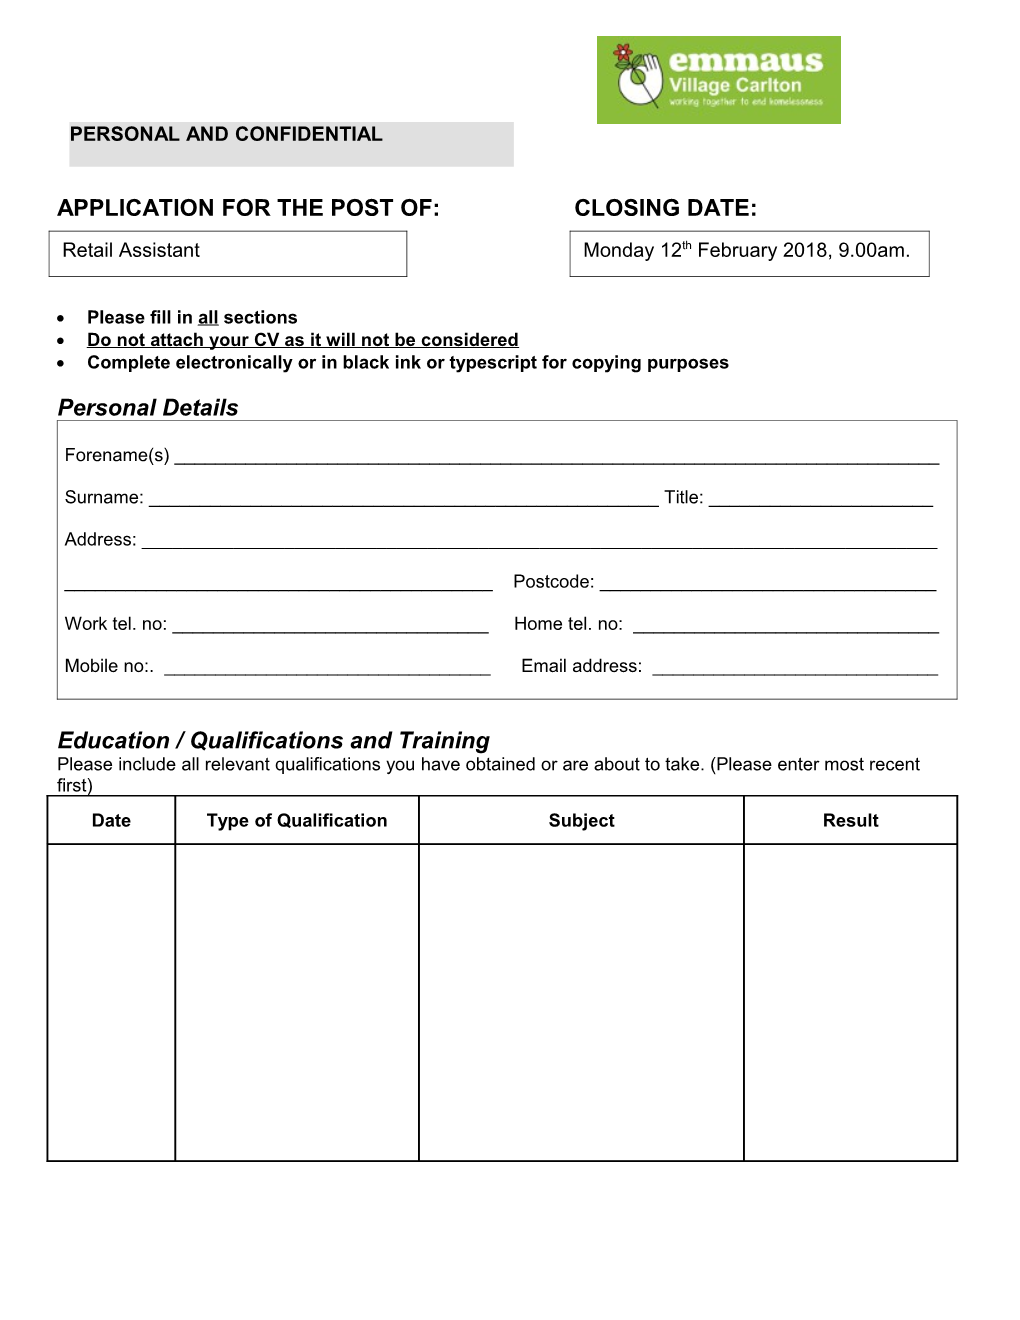 Application for the Post Of: Closing Date